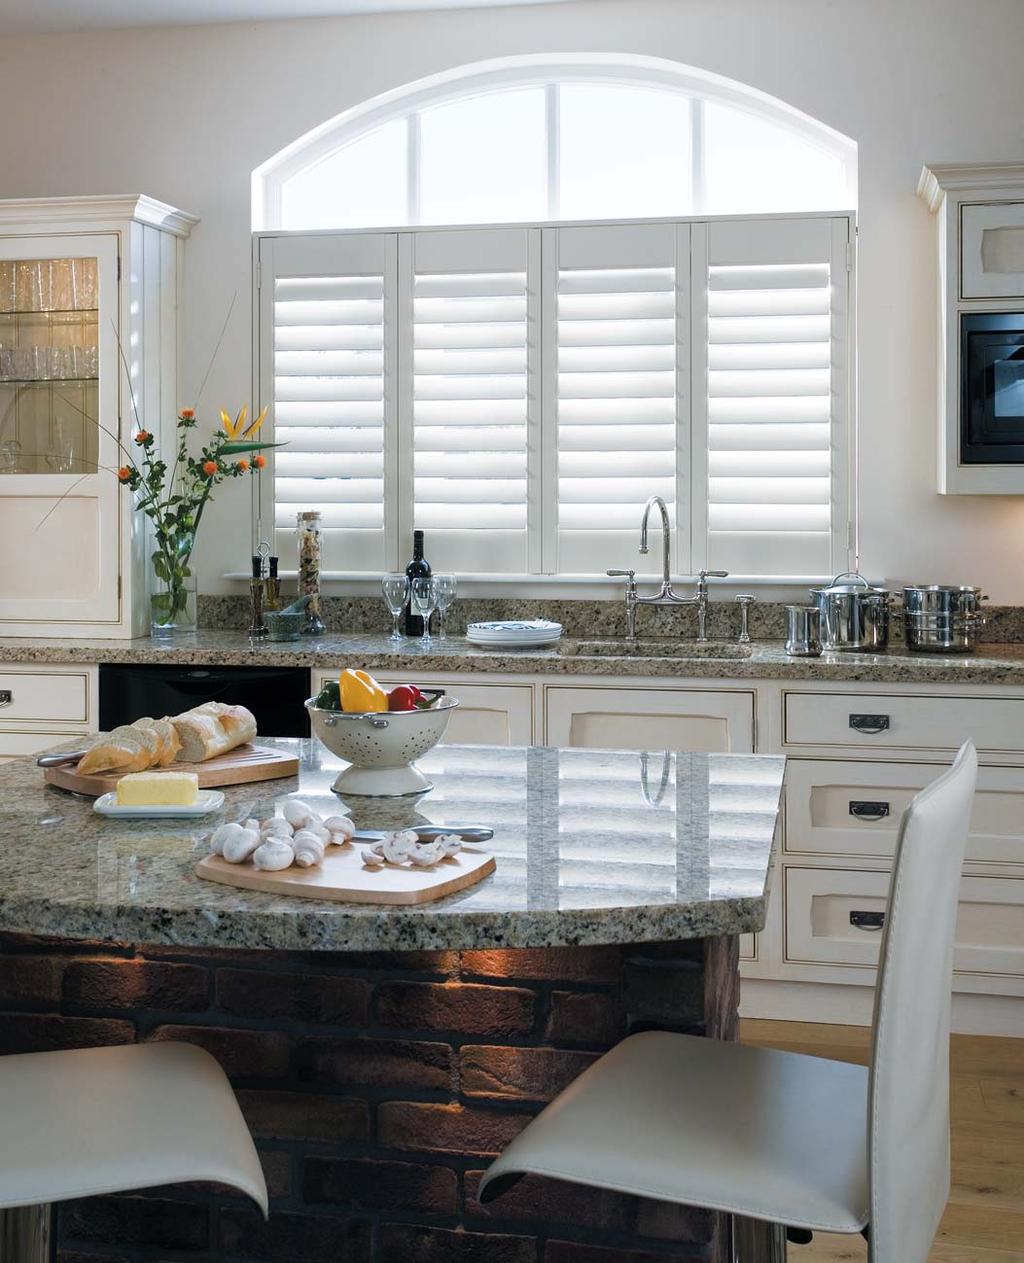 Café style shutters add a beautiful finishing touch for those areas of the home